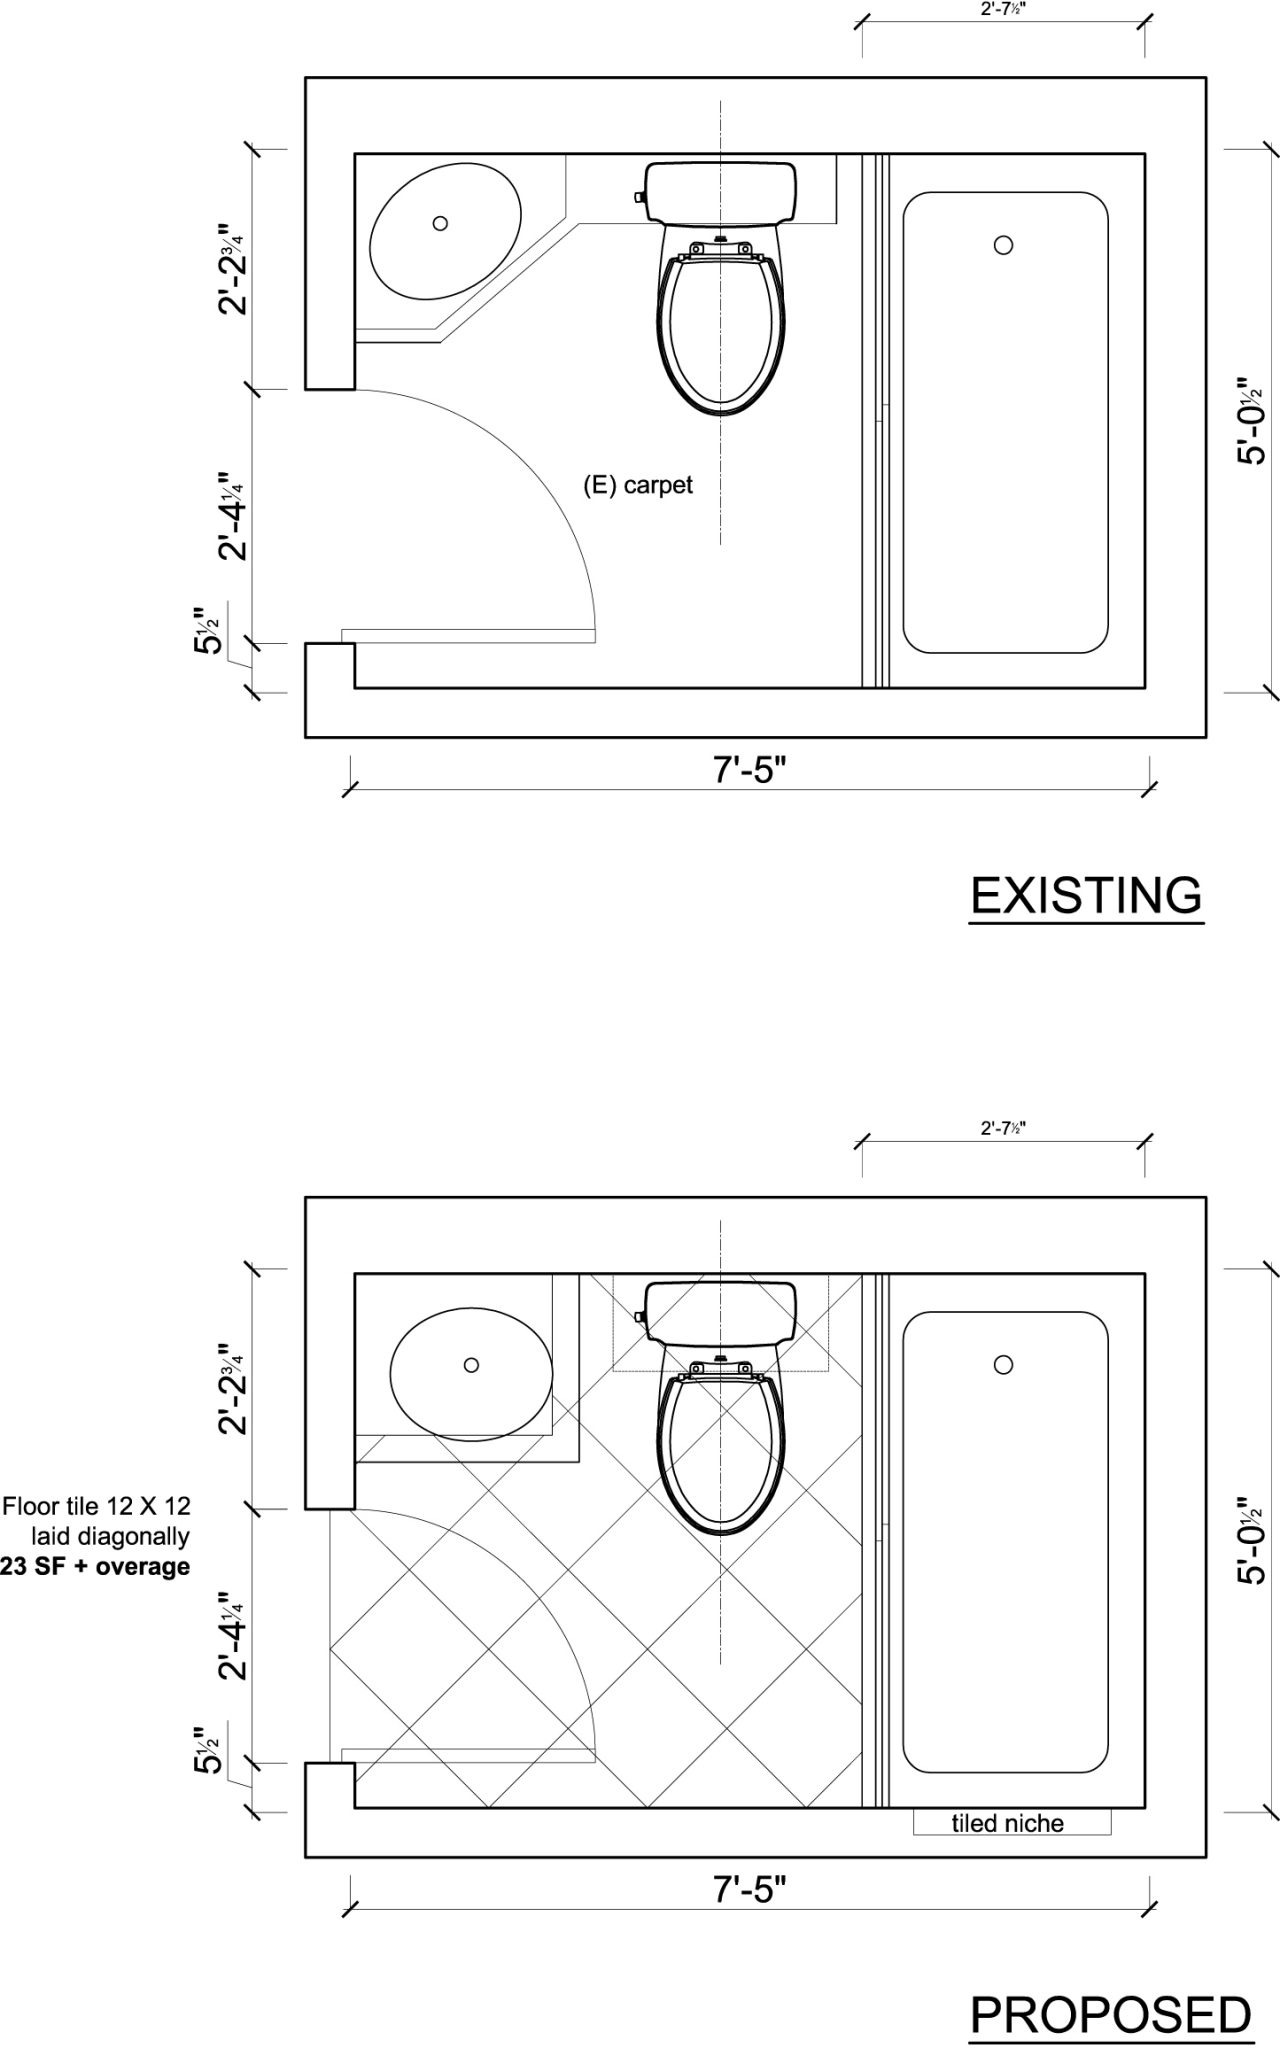 The plan for reorienting the sink, and new tile floor